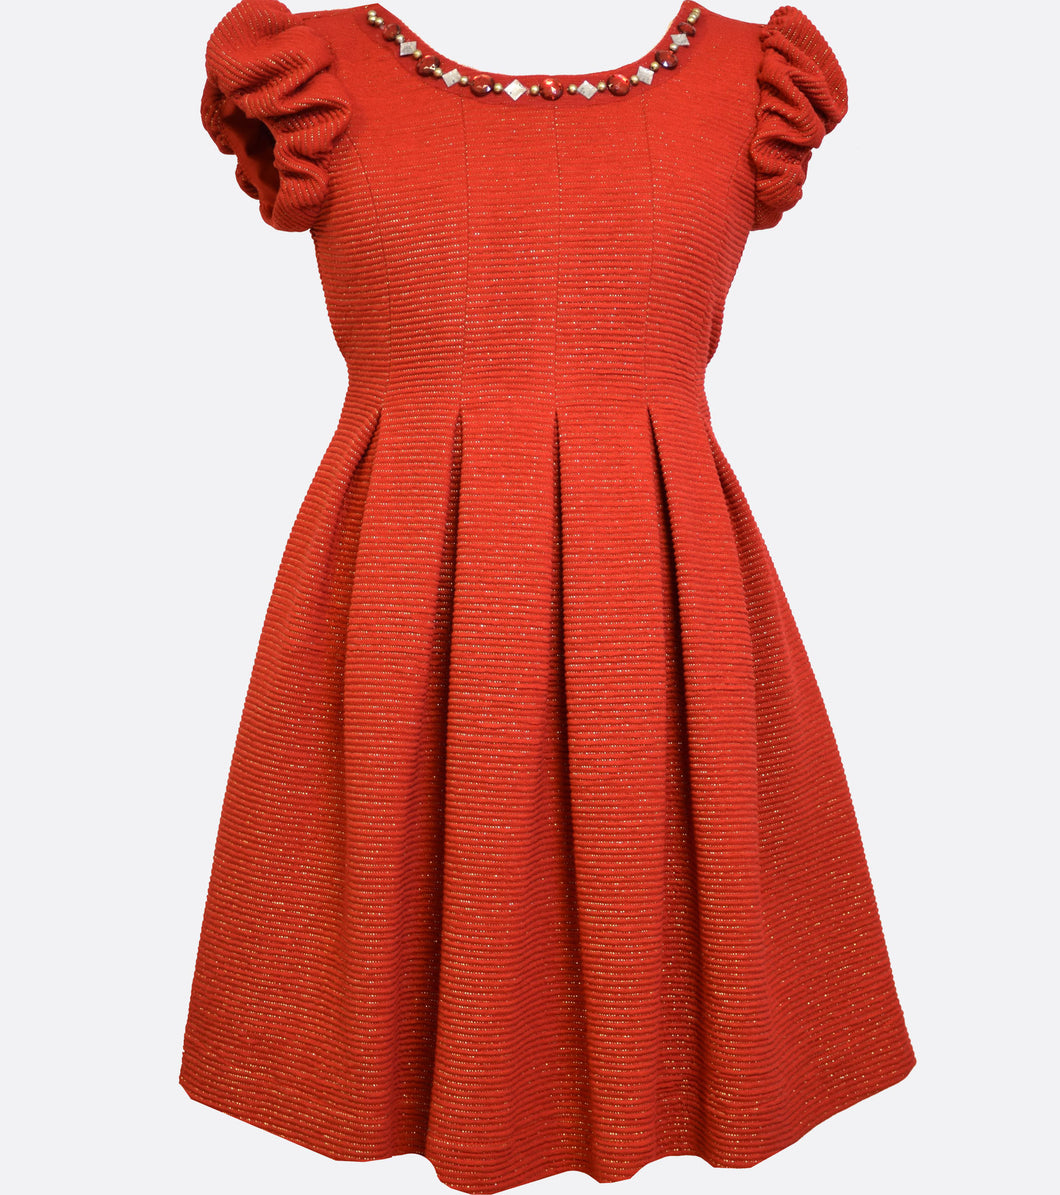 Bonnie Jean red textured knit dress with cap sleeves and jewel embellished neckline.